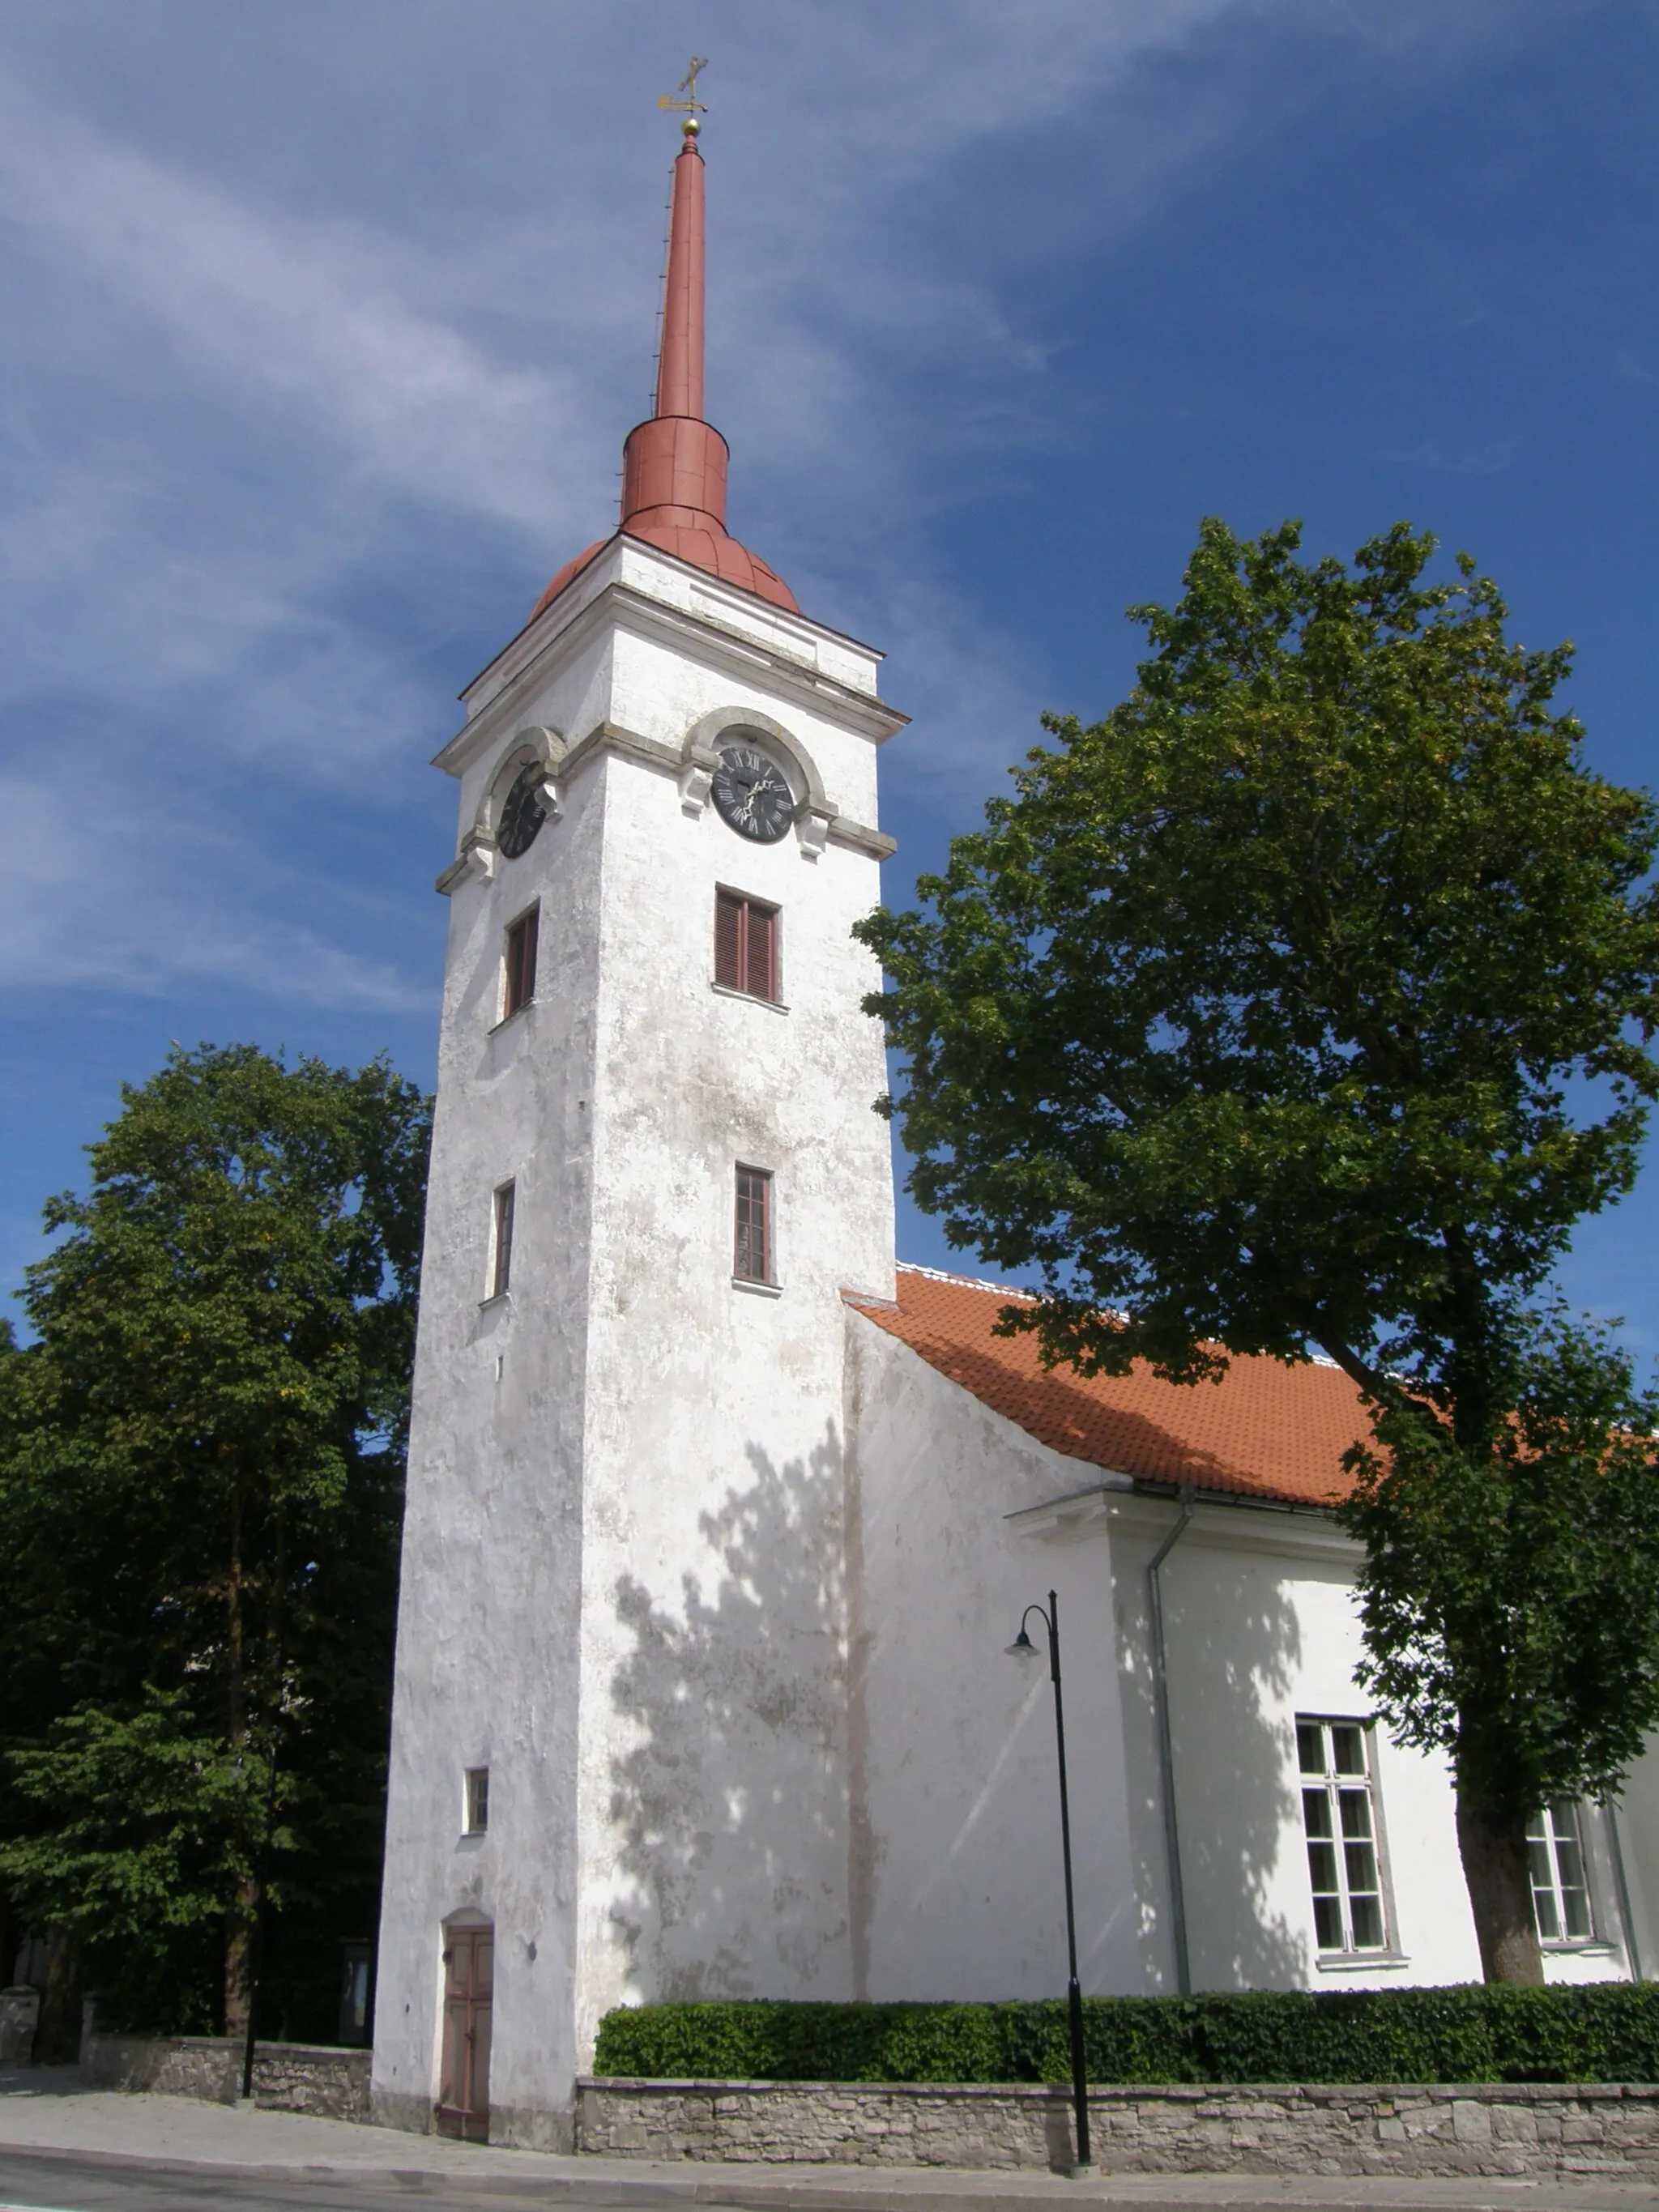 Photo showing: Kuressaare's St. Lawrence's church